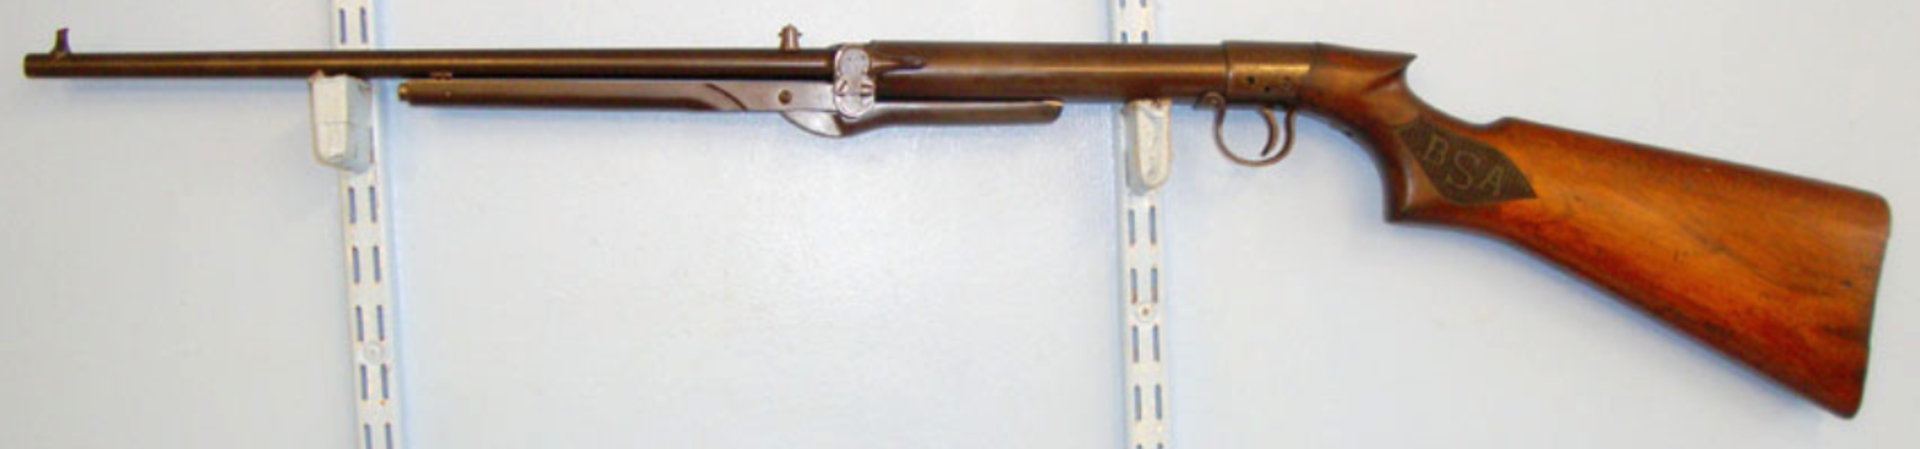 1938 B.S.A. Standard No. 1 Model (Aka 'L' Or Light/ Ladies Model) .177 Calibre Under Lever Air Rifle - Image 3 of 3